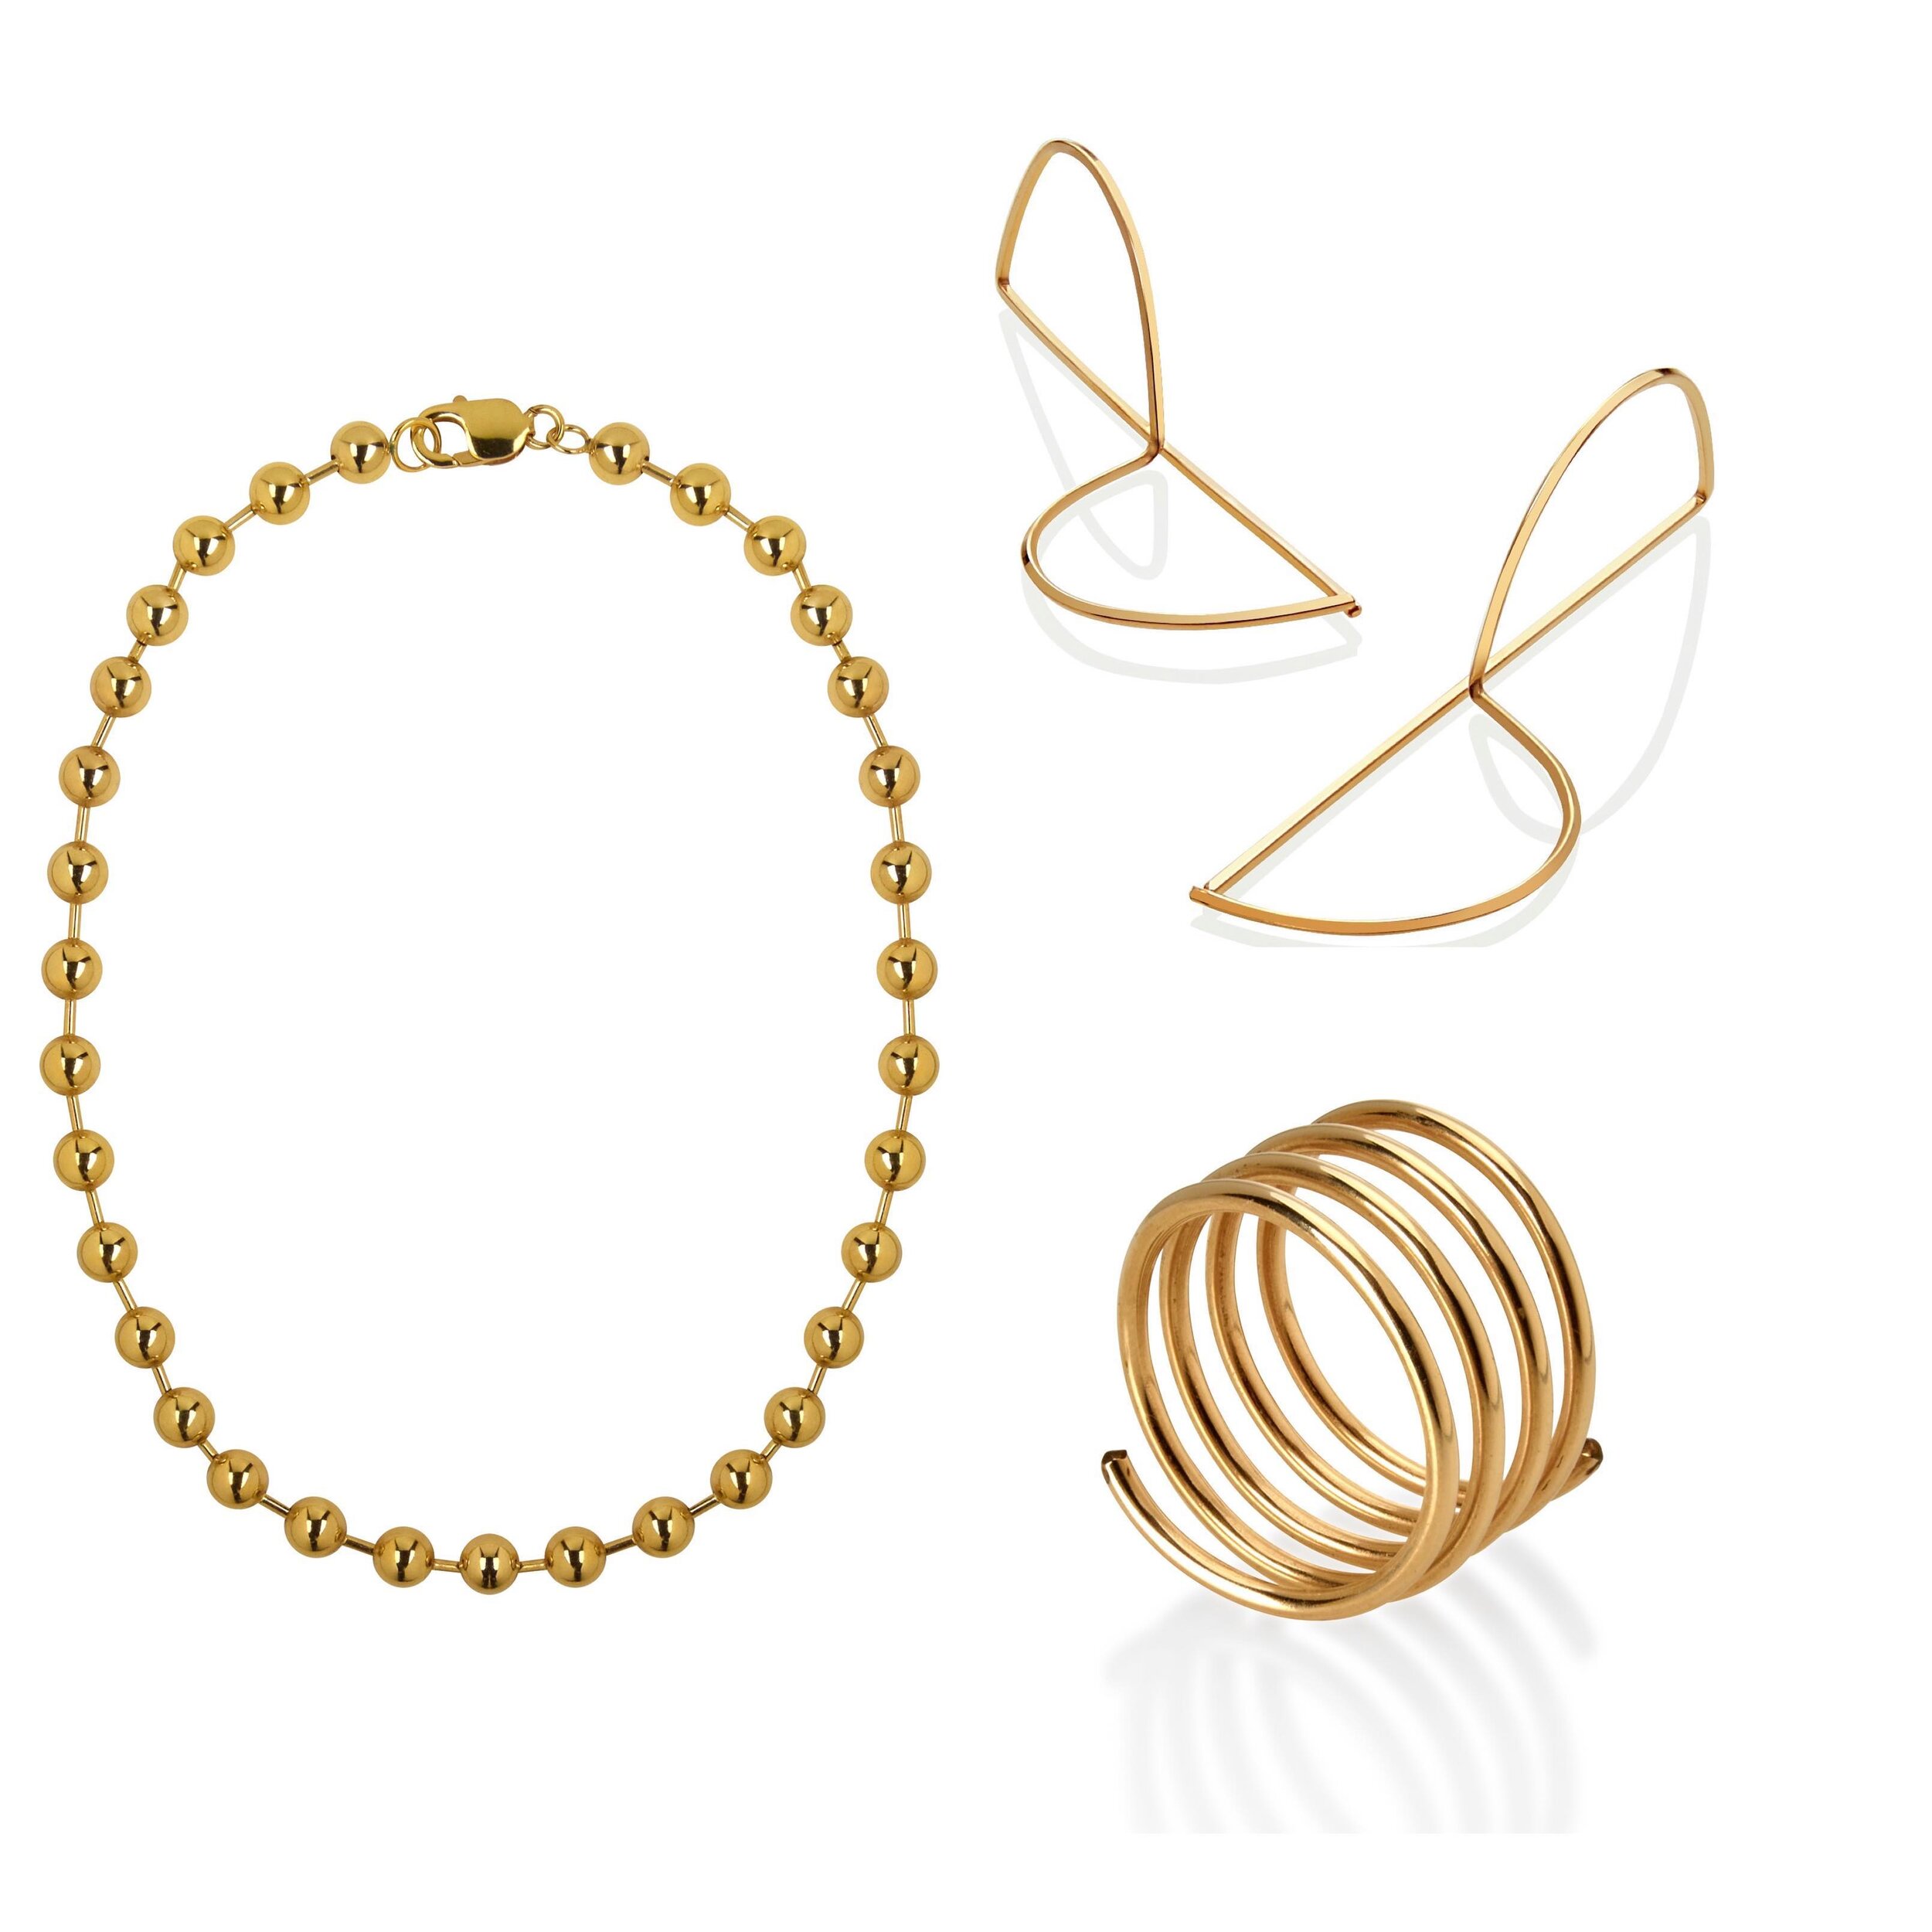 Classy yet slightly edgy

#gold #classic #classy #edgy #goldvermeil #goldfilled #hypoallegetic #genderneutral #spiralring #spring #b #ballchainnecklace